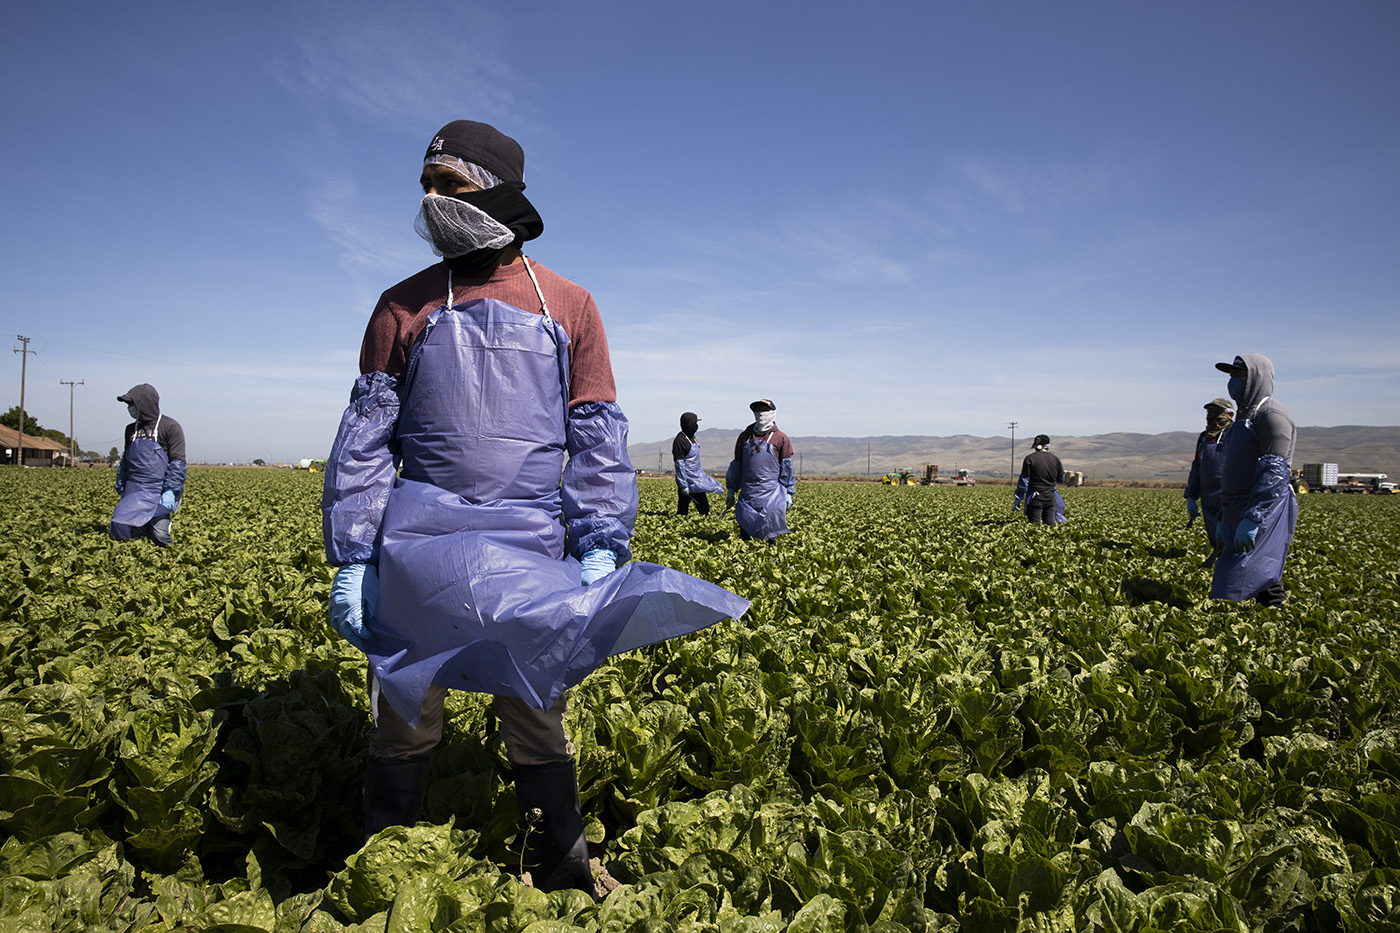 GREENFIELD, CA - APRIL 27: Farm laborers from Fresh Harvest working with an H-2A visa maintain a safe distance as a machine is moved on April 27, 2020 in Greenfield, California. Fresh Harvest is the one of the largest employers of people using the H-2A temporary agricultural worker visa for labor, harvesting and staffing in the United States. The company is implementing strict health and safety initiatives for their workers during the coronavirus pandemic and are trying a number of new techniques to enhance safety in the field as well as in work accommodations. Employees have their temperature taken daily and are also asked a series of questions about how they feel. Despite current record unemployment rates in the U.S. due to COVID-19-related layoffs, there have been few applications to do this kind of work despite extensive mandatory advertising by companies such as Fresh Harvest. (Photo by Brent Stirton/Getty Images)